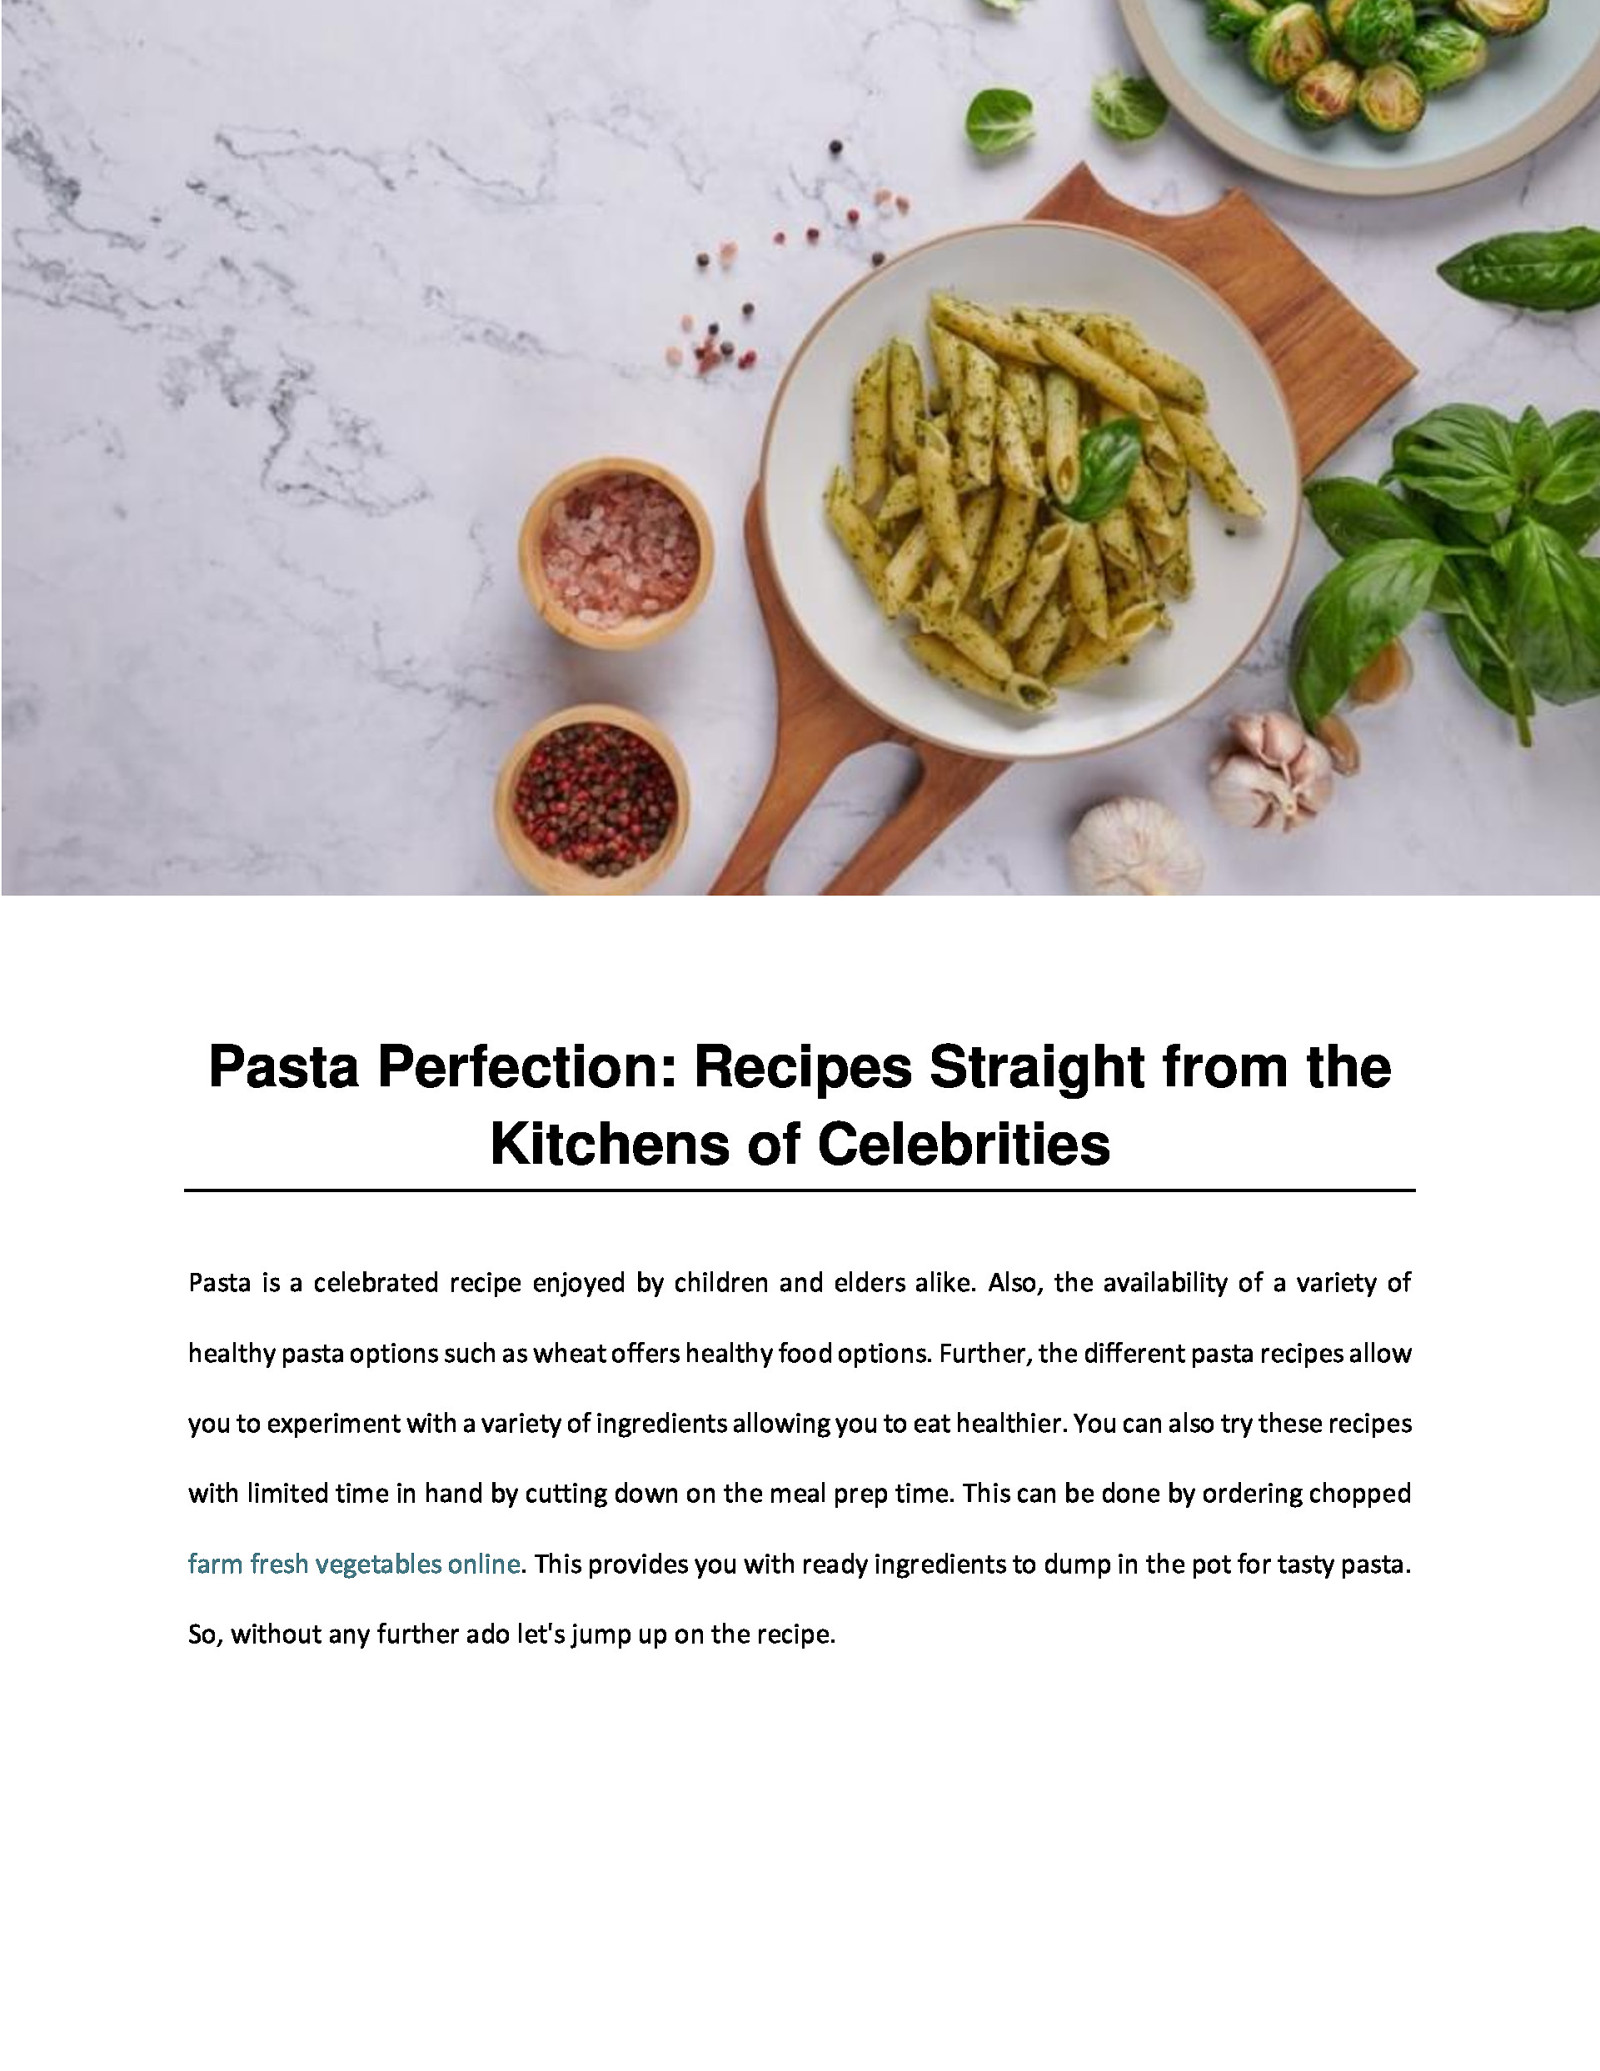 Pasta Perfection: Recipes Straight from the Kitchens of Celebrities